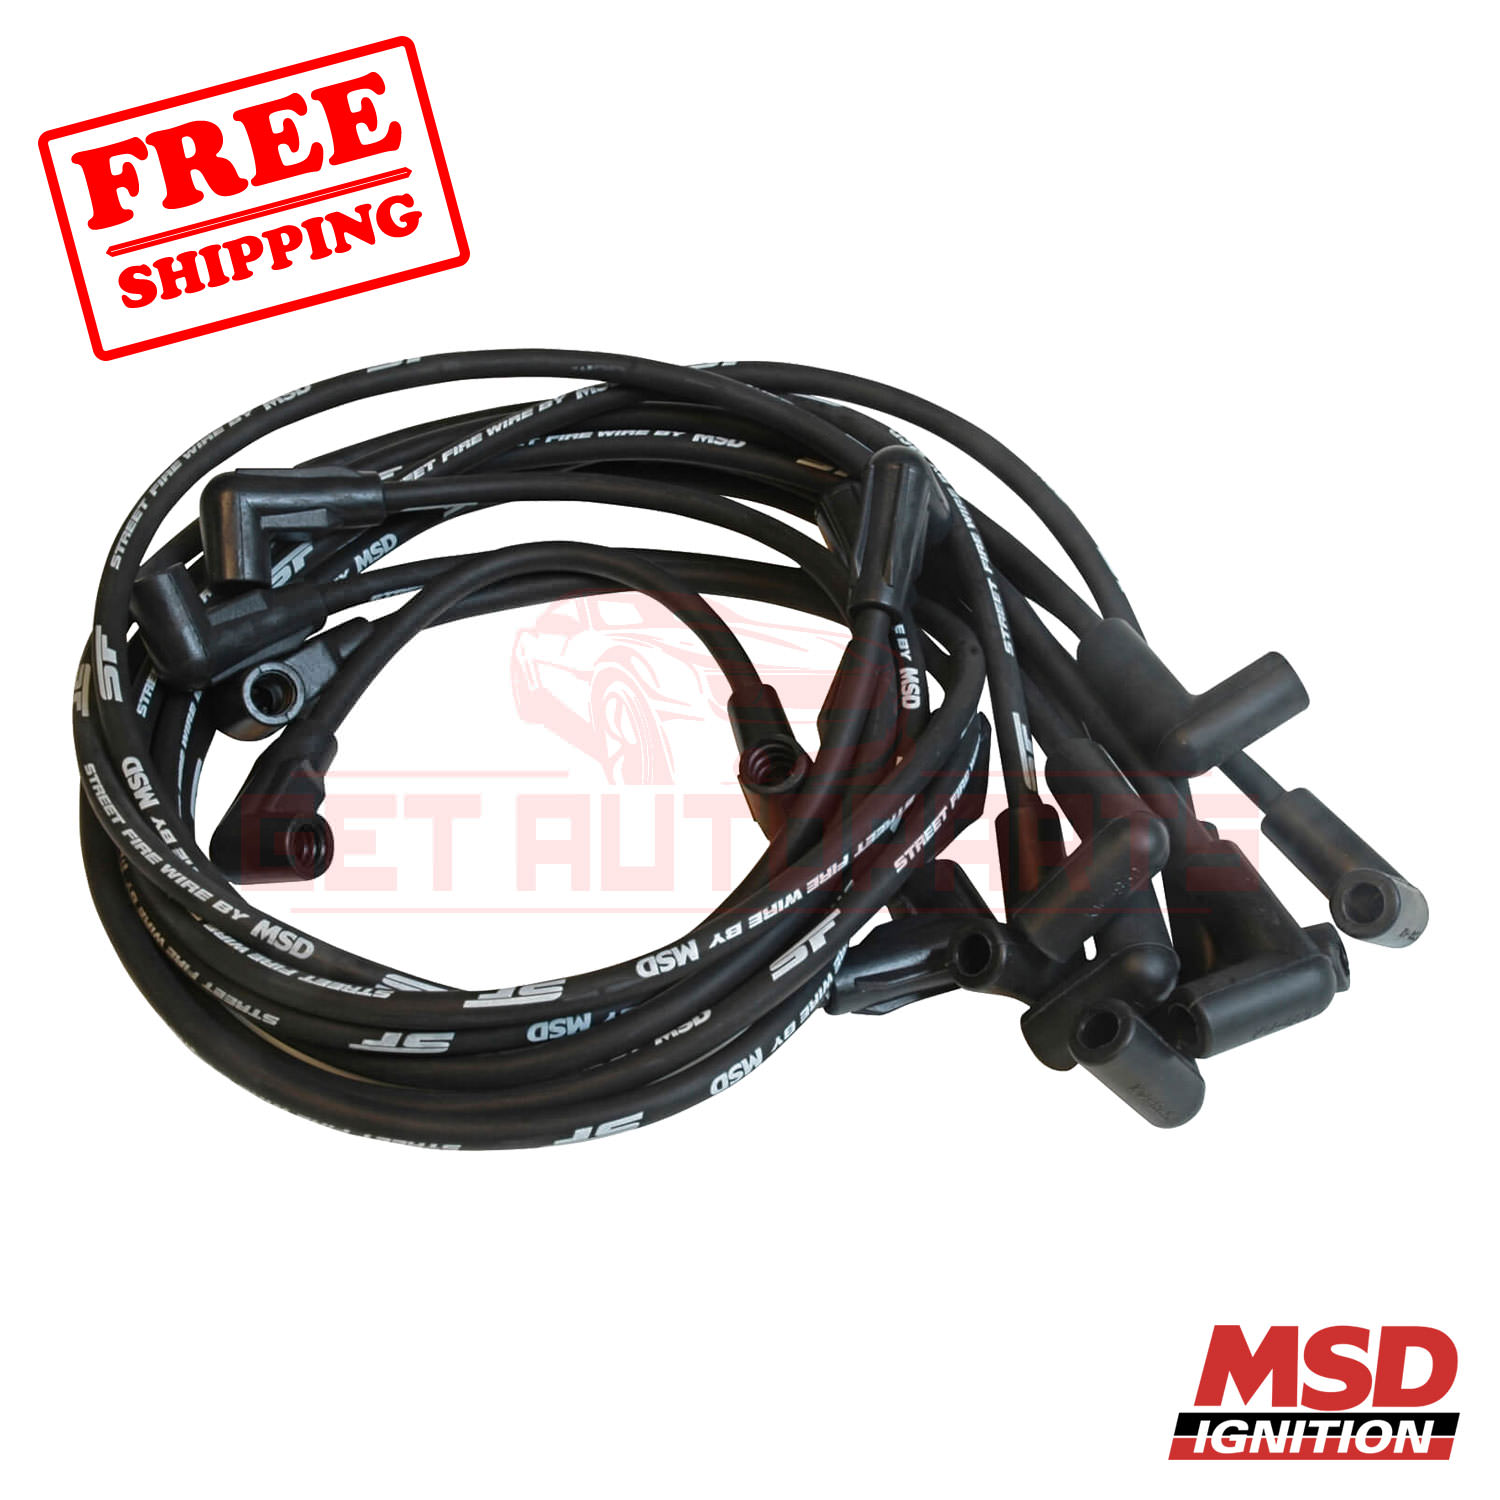 MSD Spark Plug Wire Set compatible with Chevrolet 87-1988